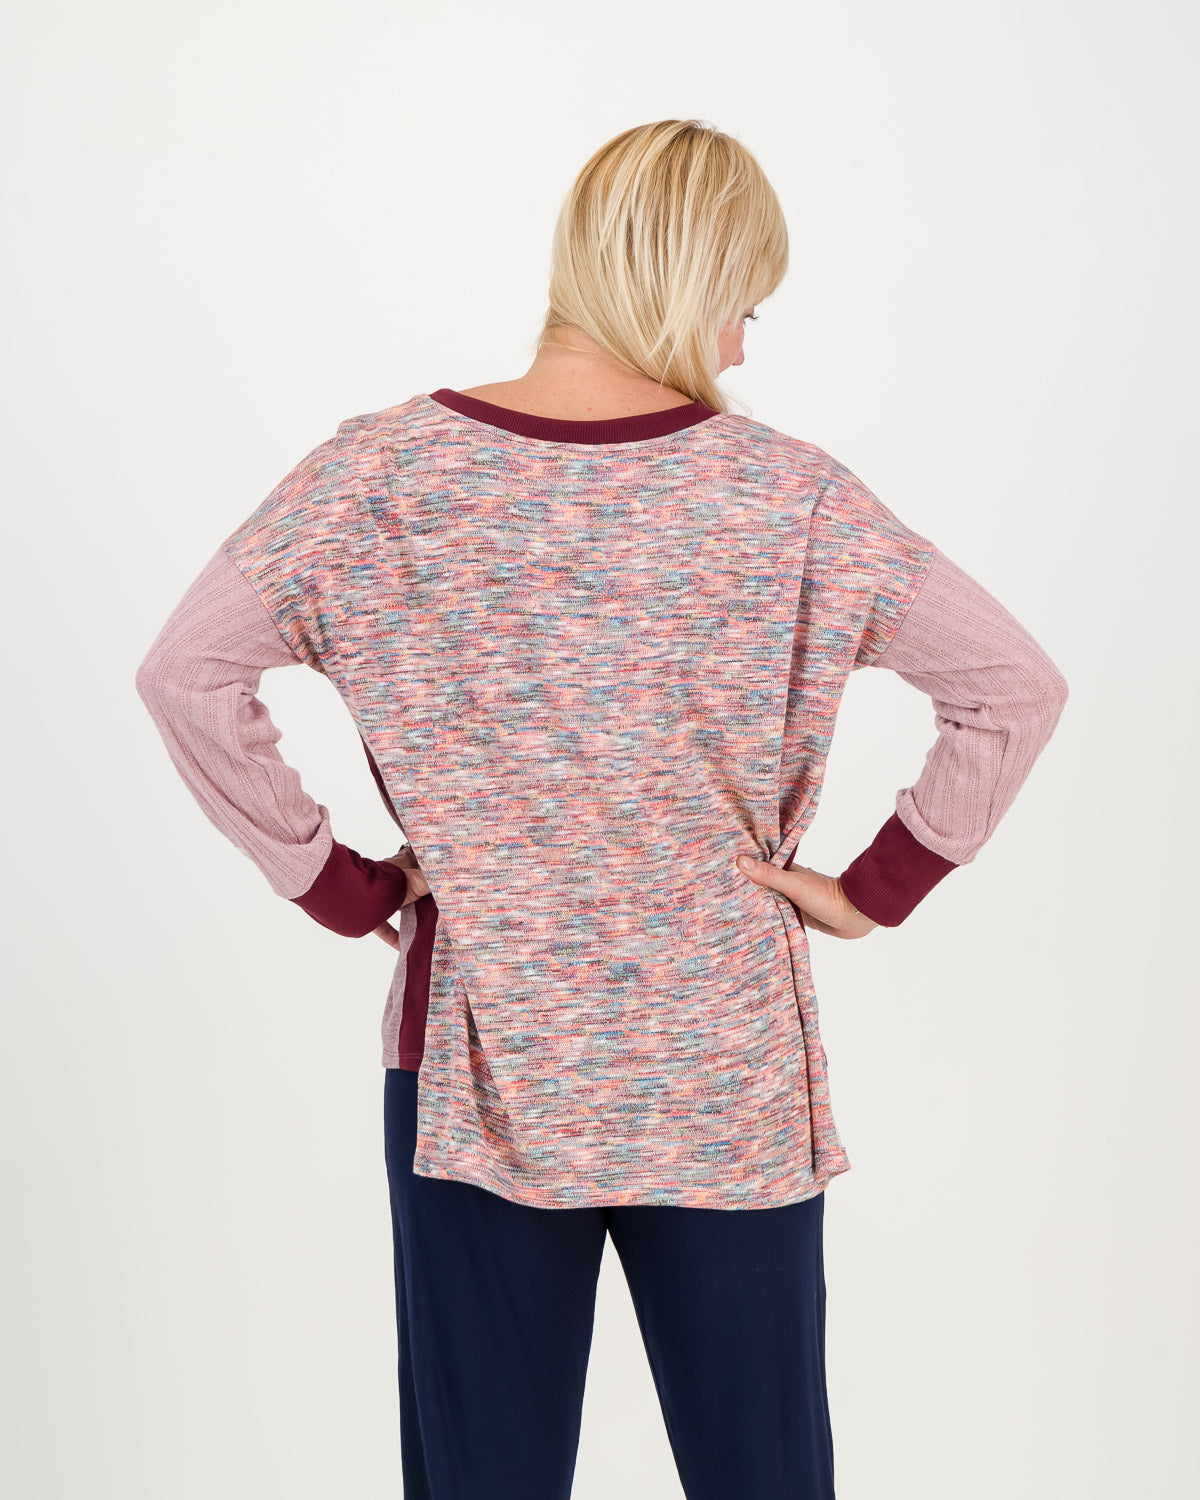 back view of Carefree casual lavender Jersey, boxy shape with longer back